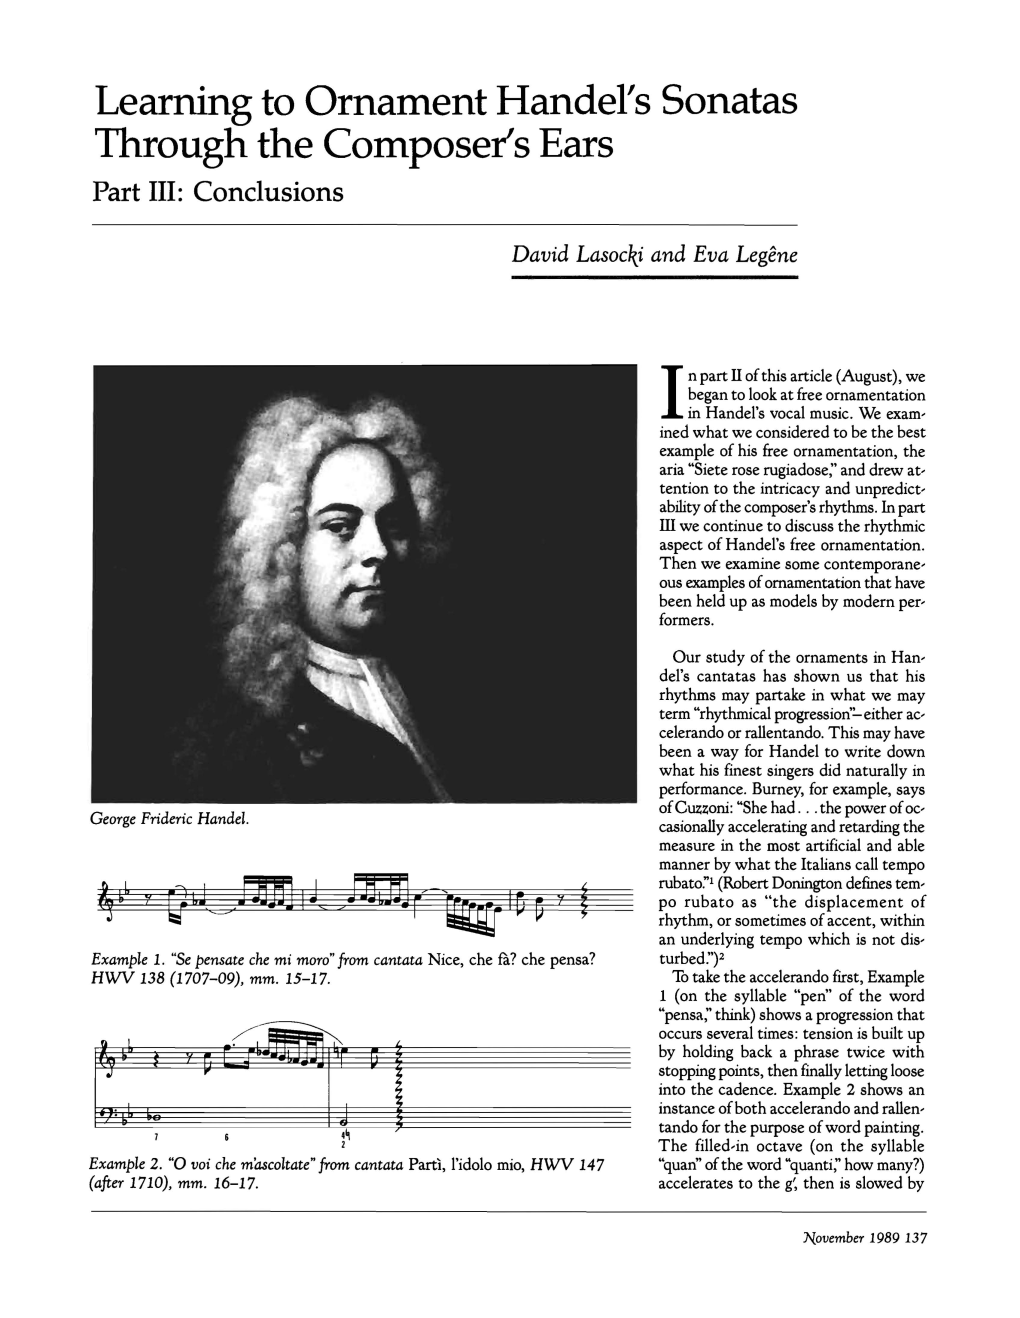 Learning to Ornament Handel's Sonatas Through the Composer's Ears Part III: Conclusions